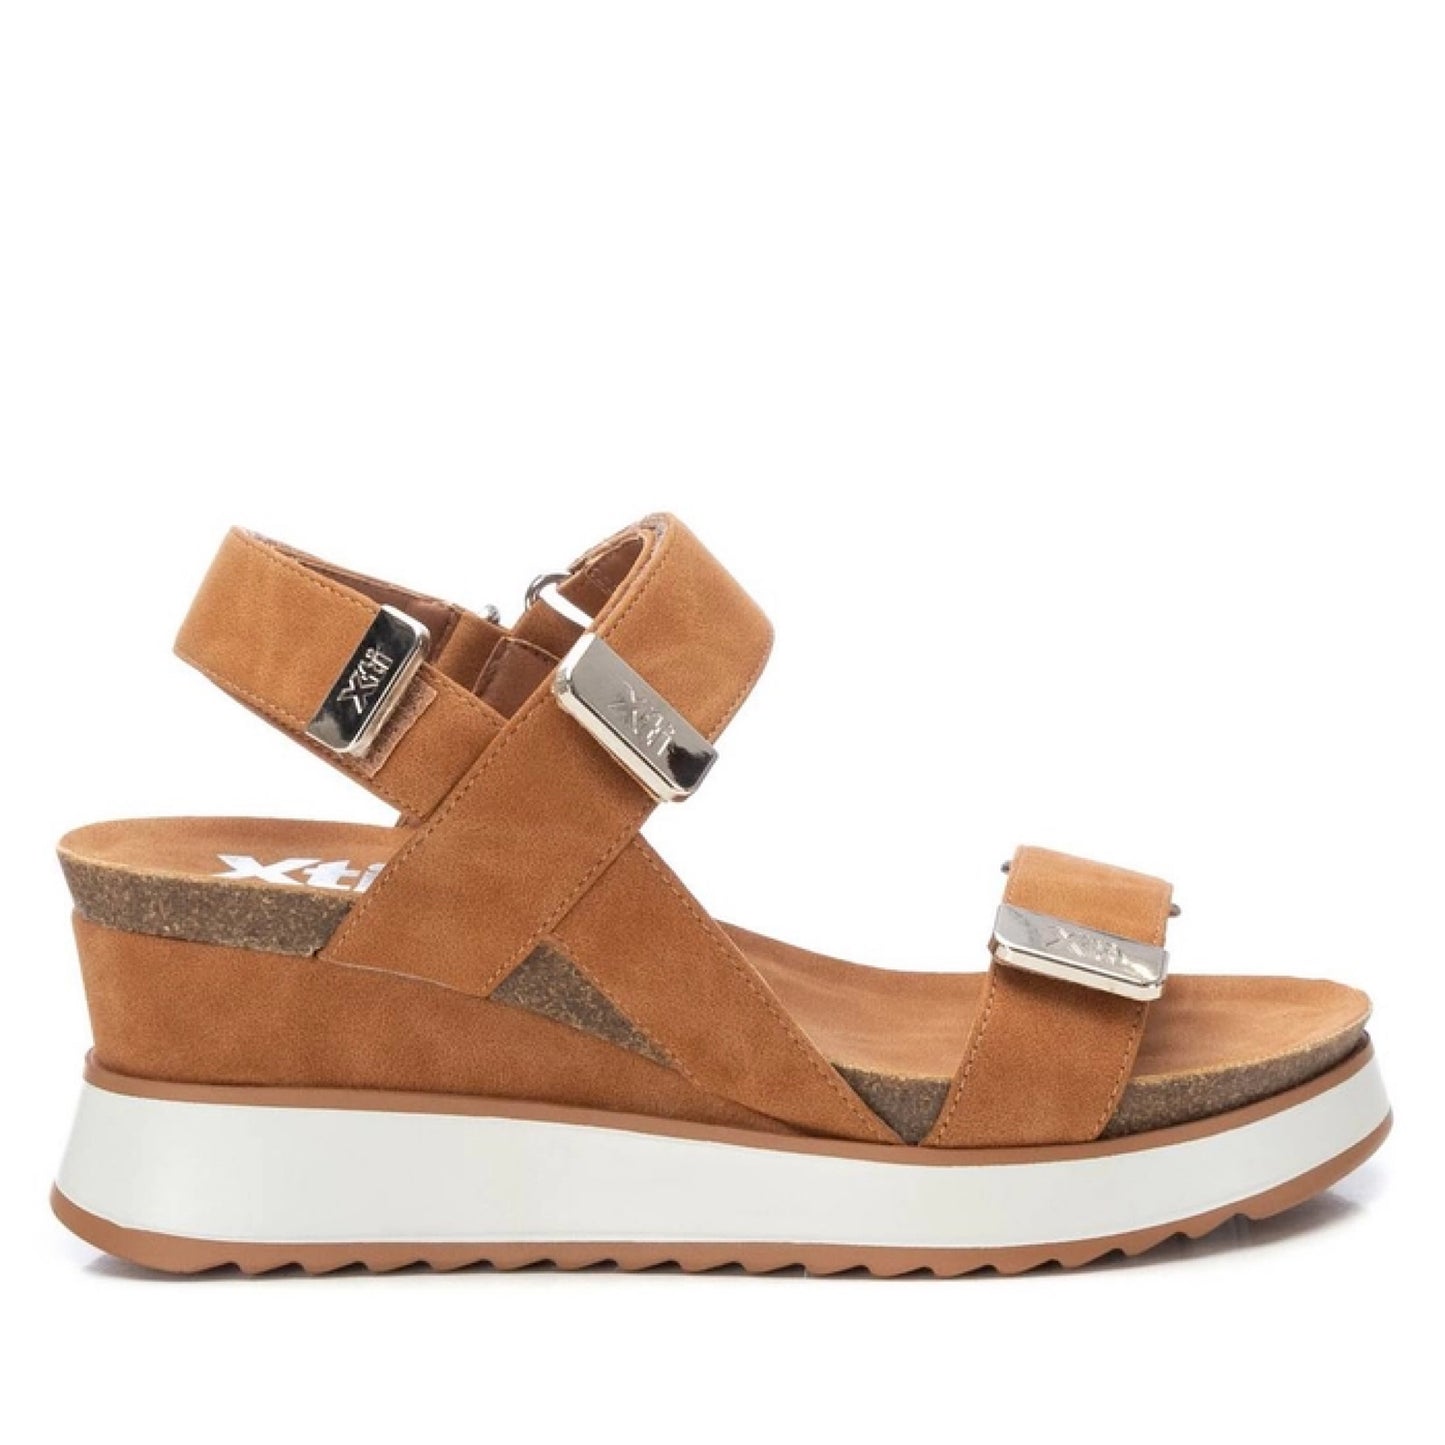 XTI Camel Wedge